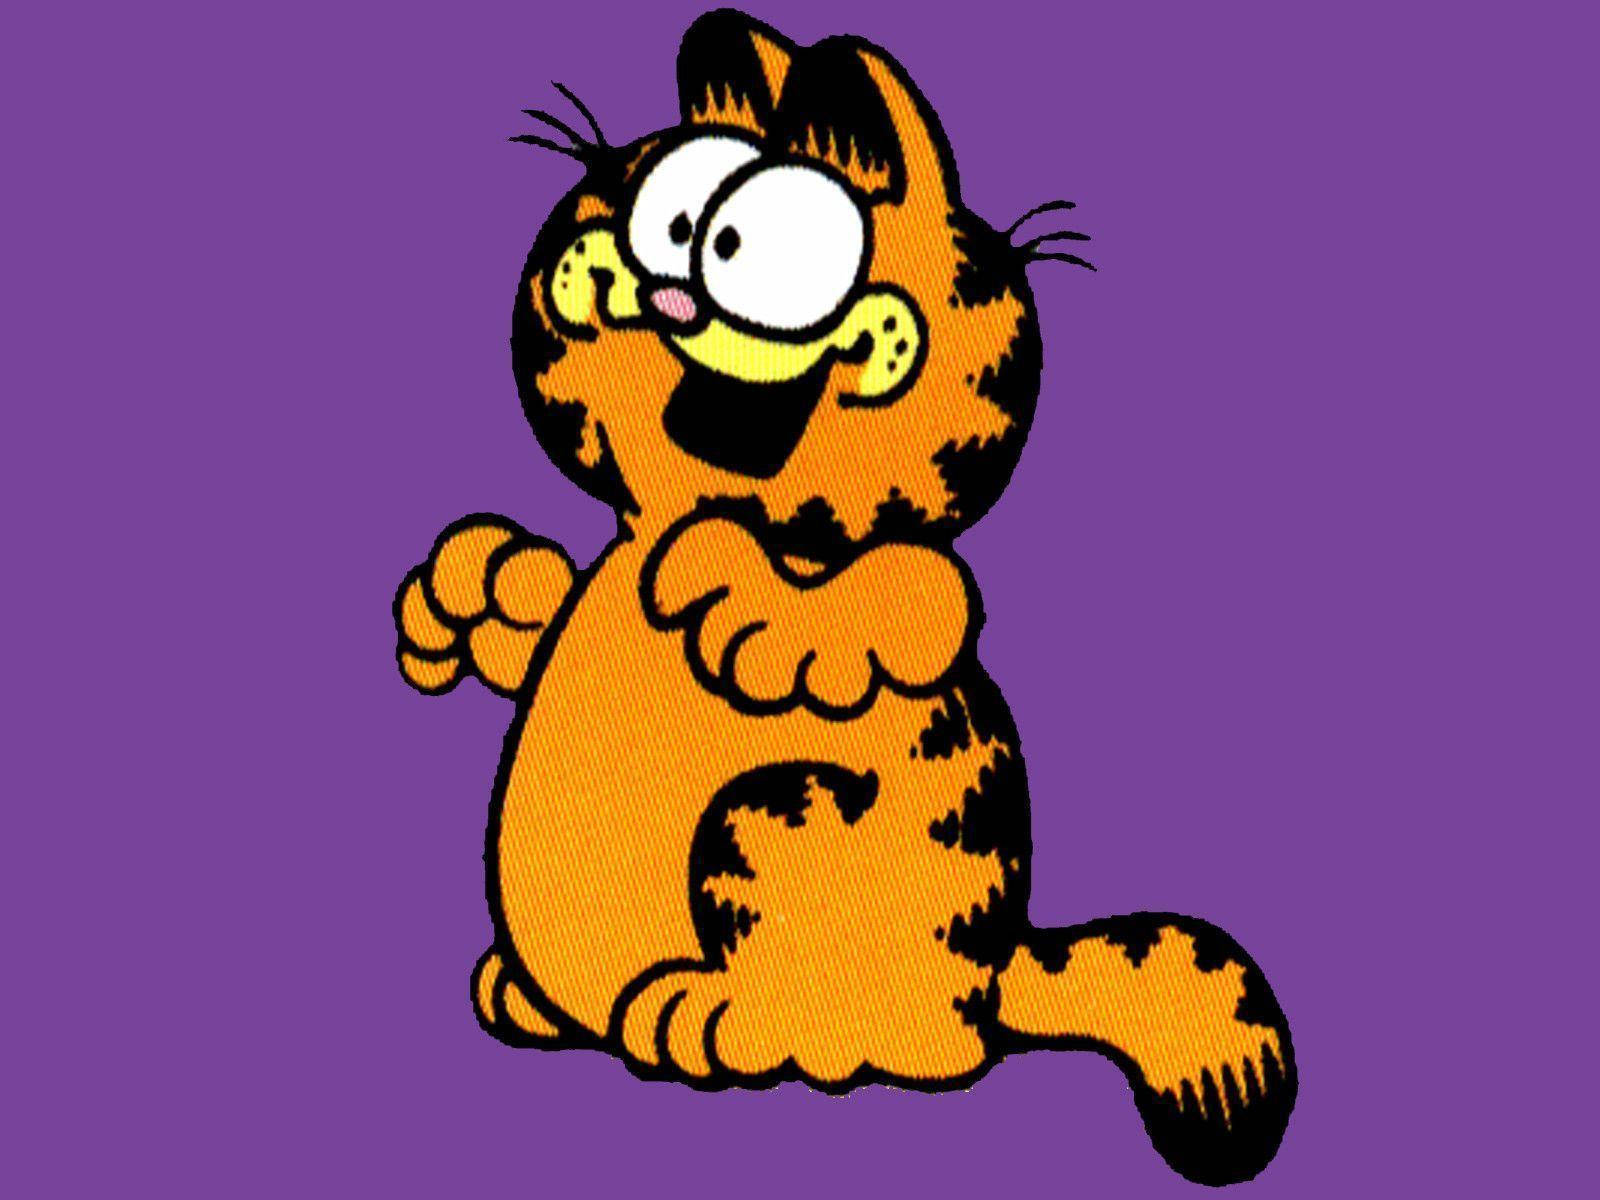 1600X1200 Garfield Wallpaper and Background